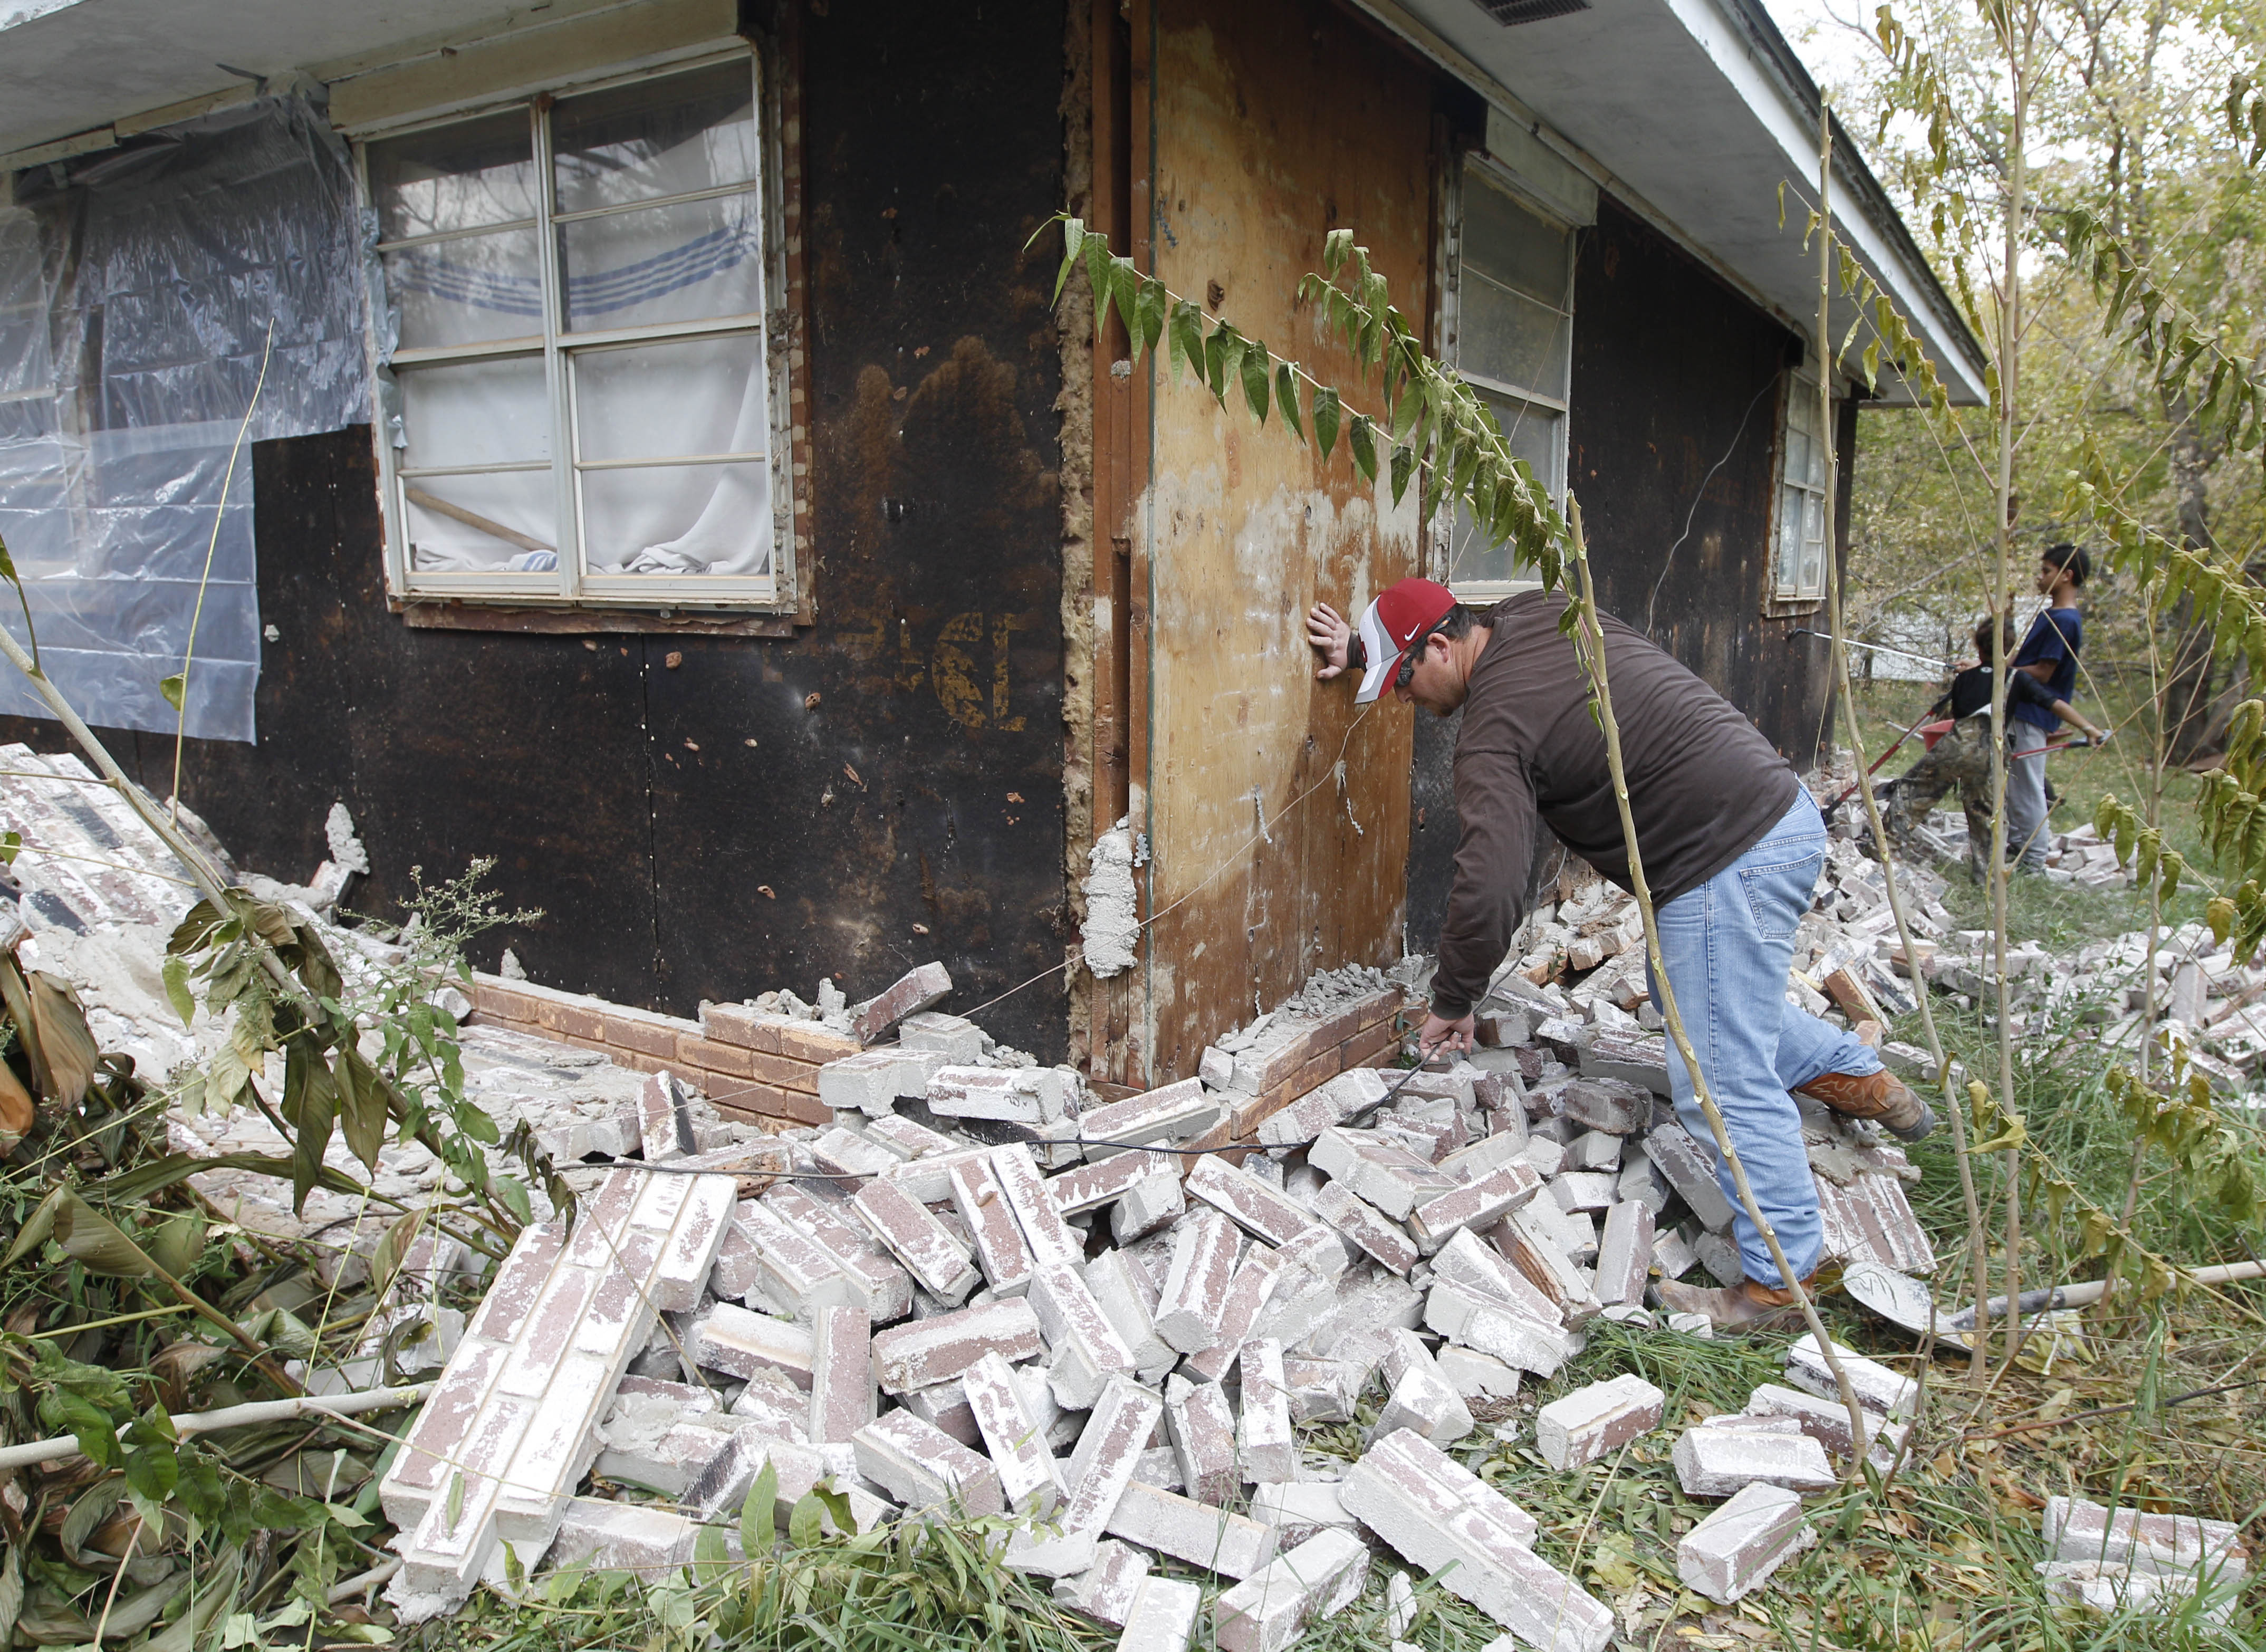 Chad Devereaux examines bricks that fell from three sides of his in-laws' home in Sparks, Okla., on Nov. 6, 2011, following two earthquakes that hit the area. (Sue Ogrocki—AP)